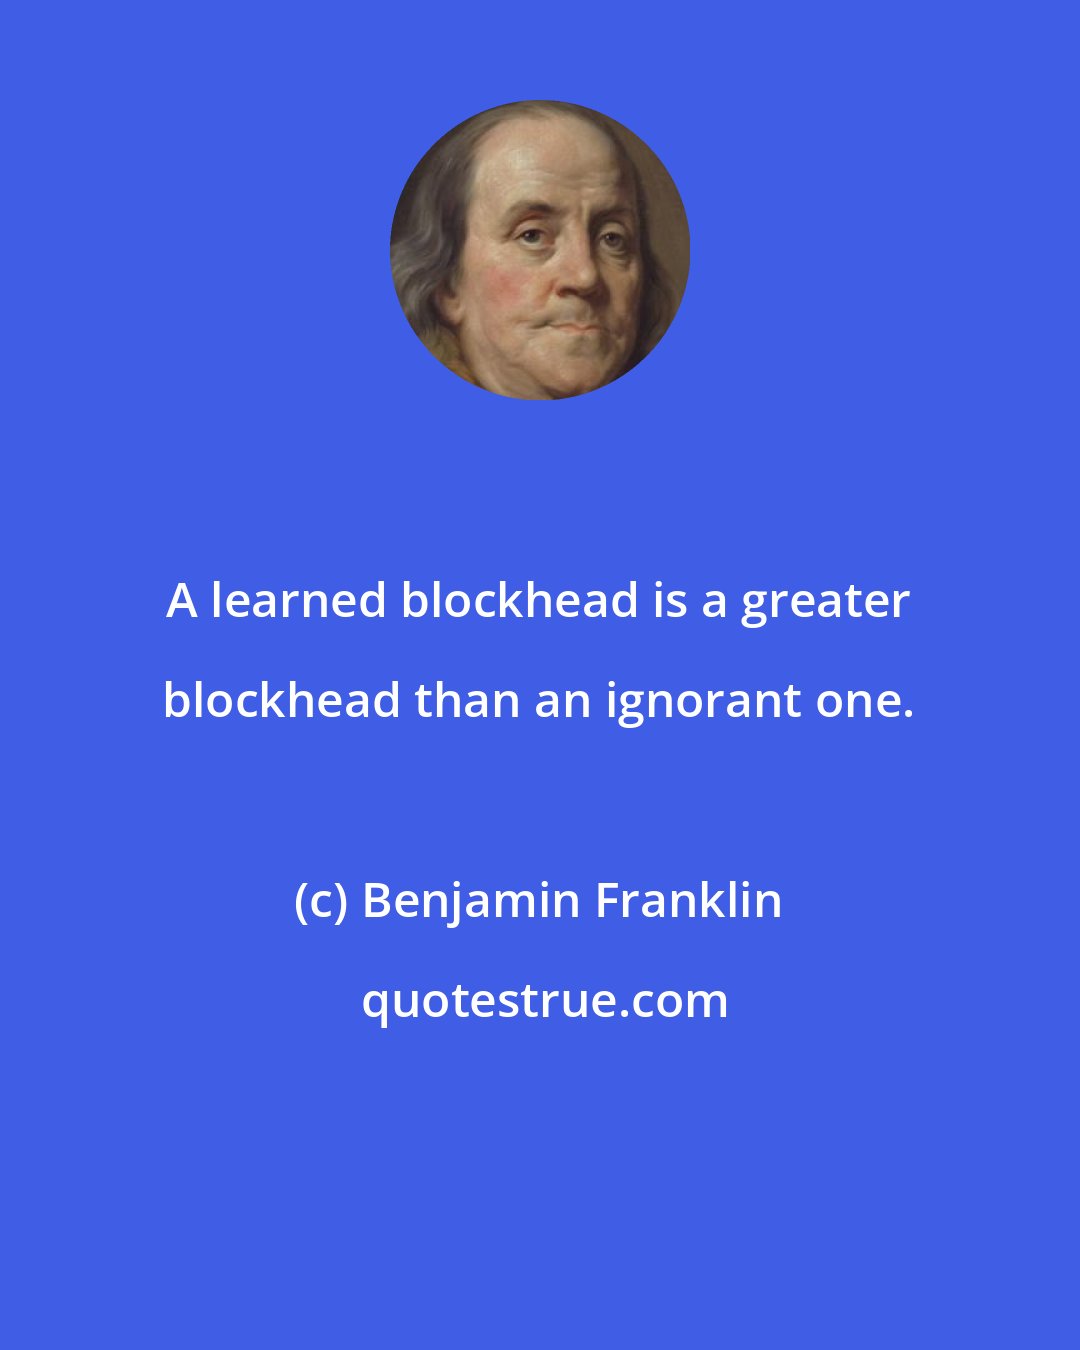 Benjamin Franklin: A learned blockhead is a greater blockhead than an ignorant one.